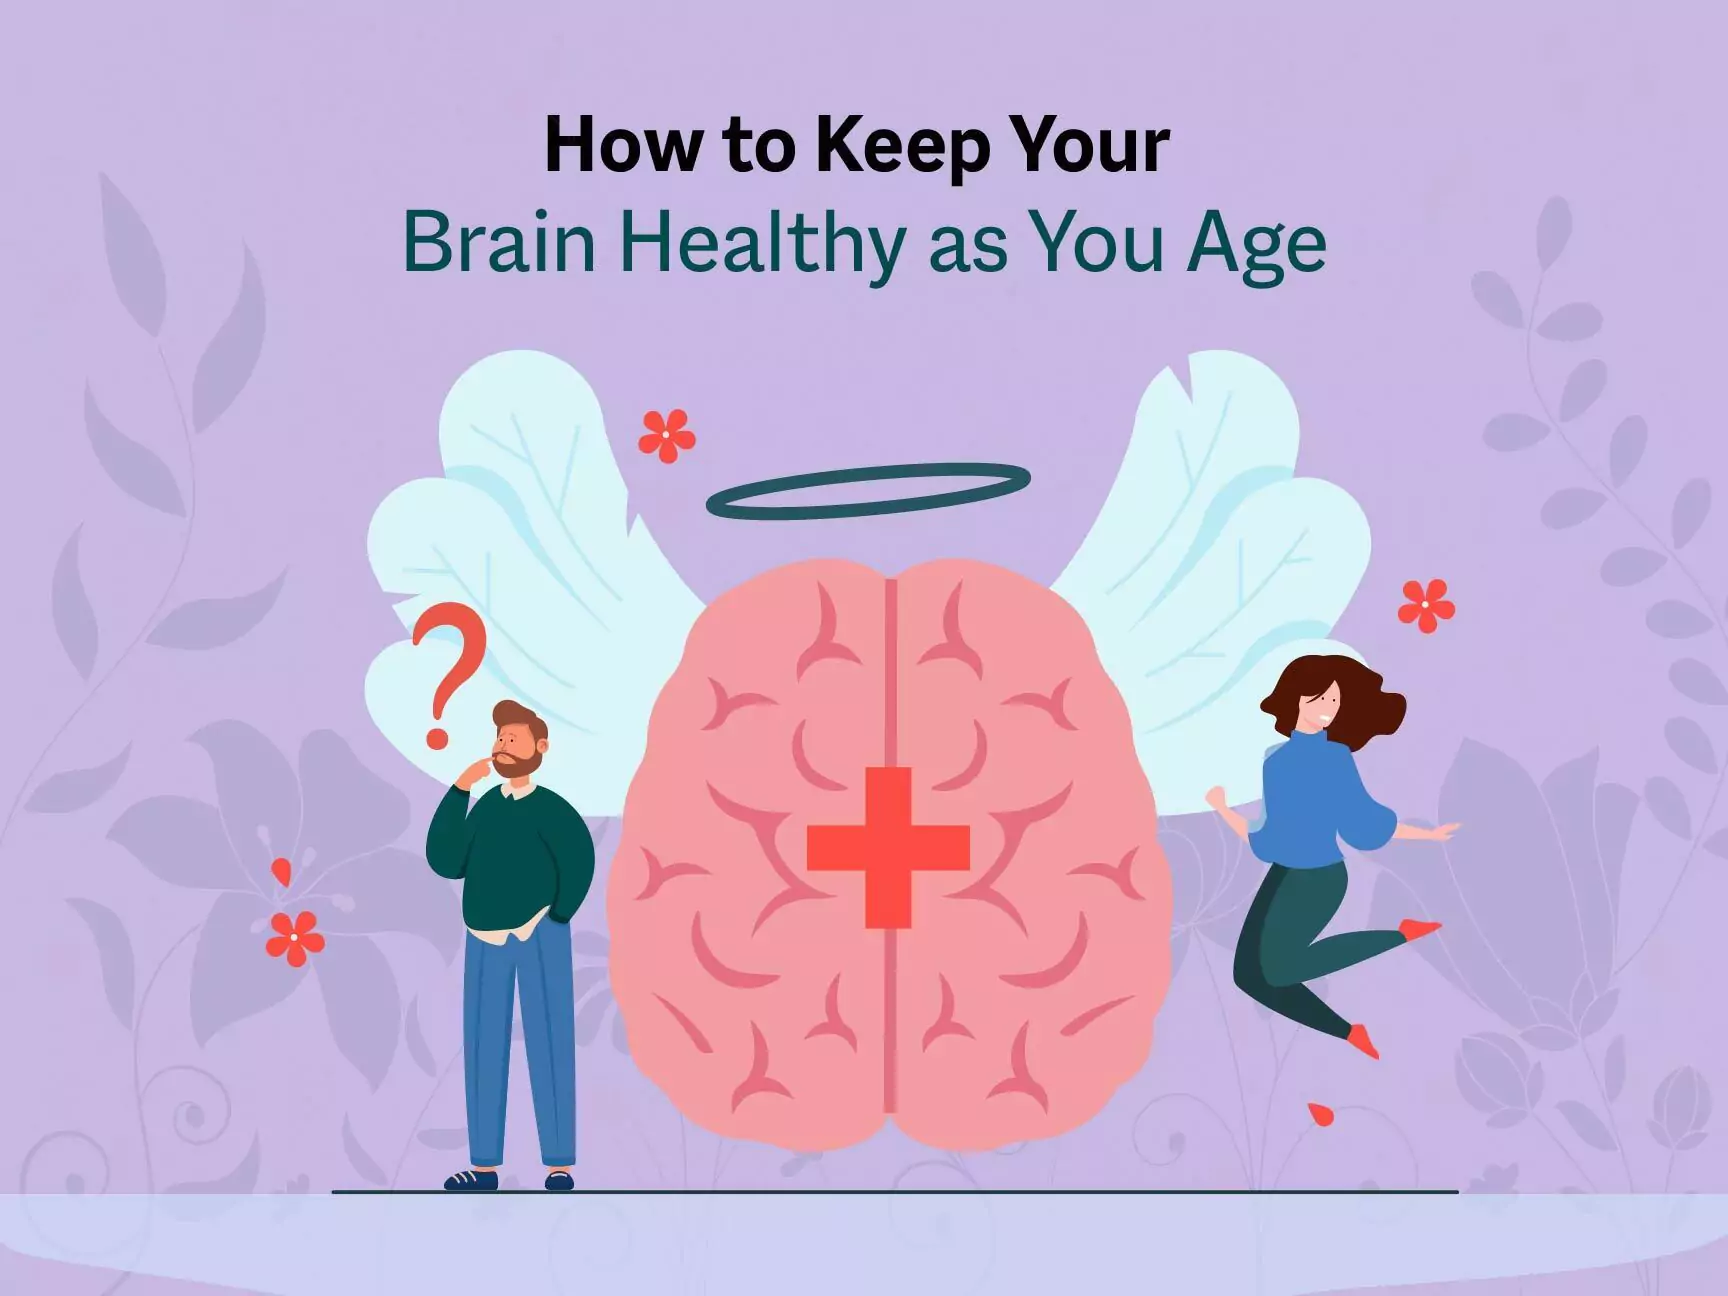 How to Keep Your Brain Healthy as You Age